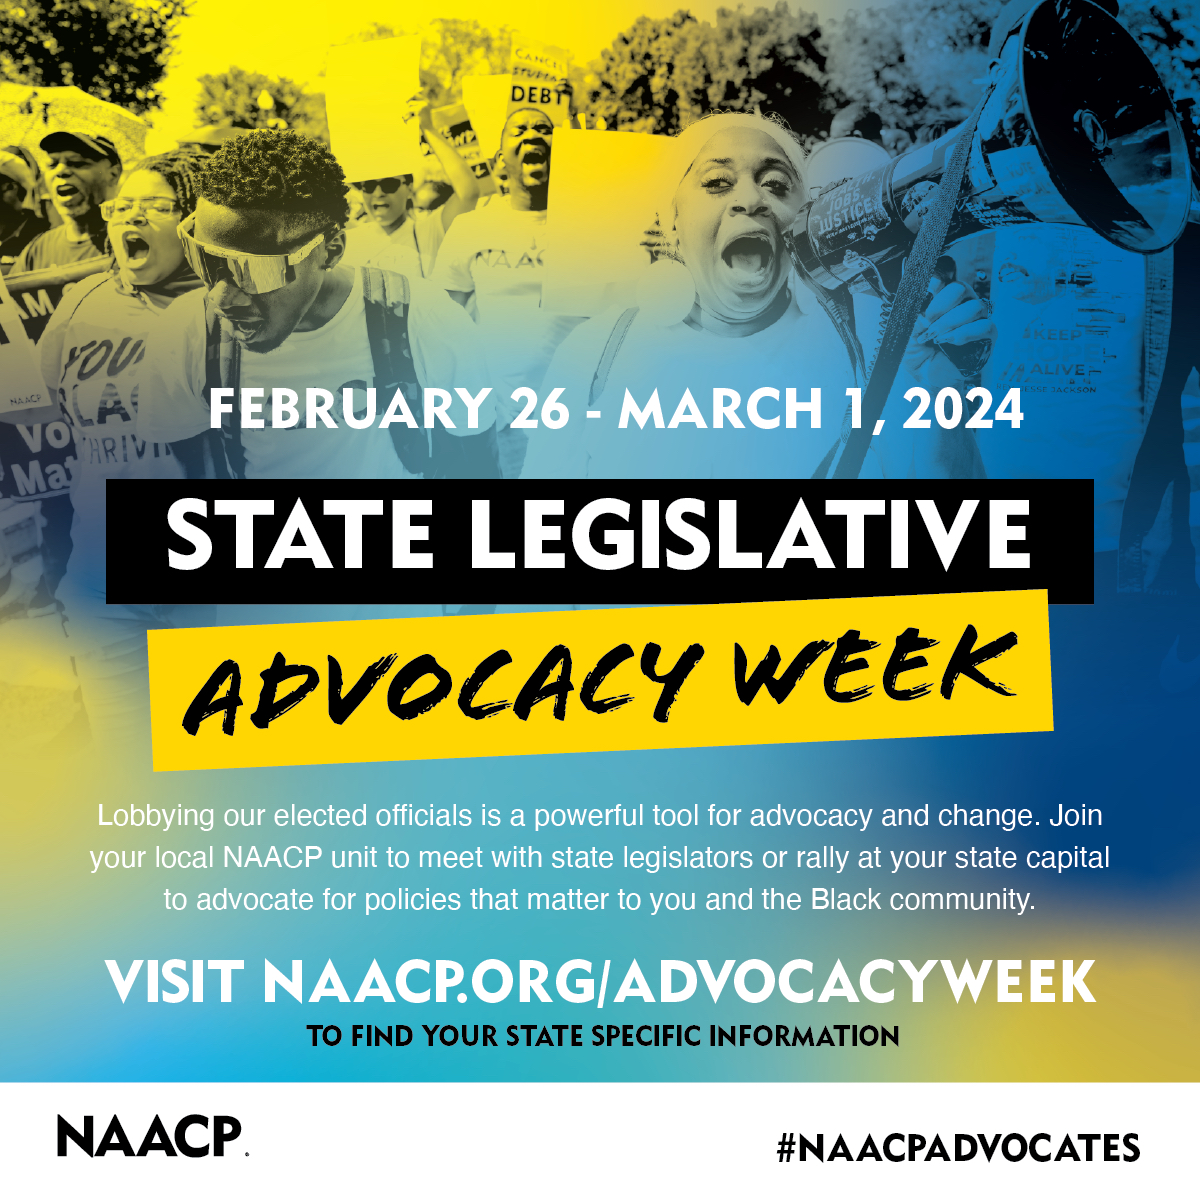 Join your local NAACP unit for State Legislative Advocacy Week! Next week, #NAACPAdvocates will be meeting with state legislators or rallying at their state capitals to advocate for policies that matter to our community. Learn more: bit.ly/3I5fQVw